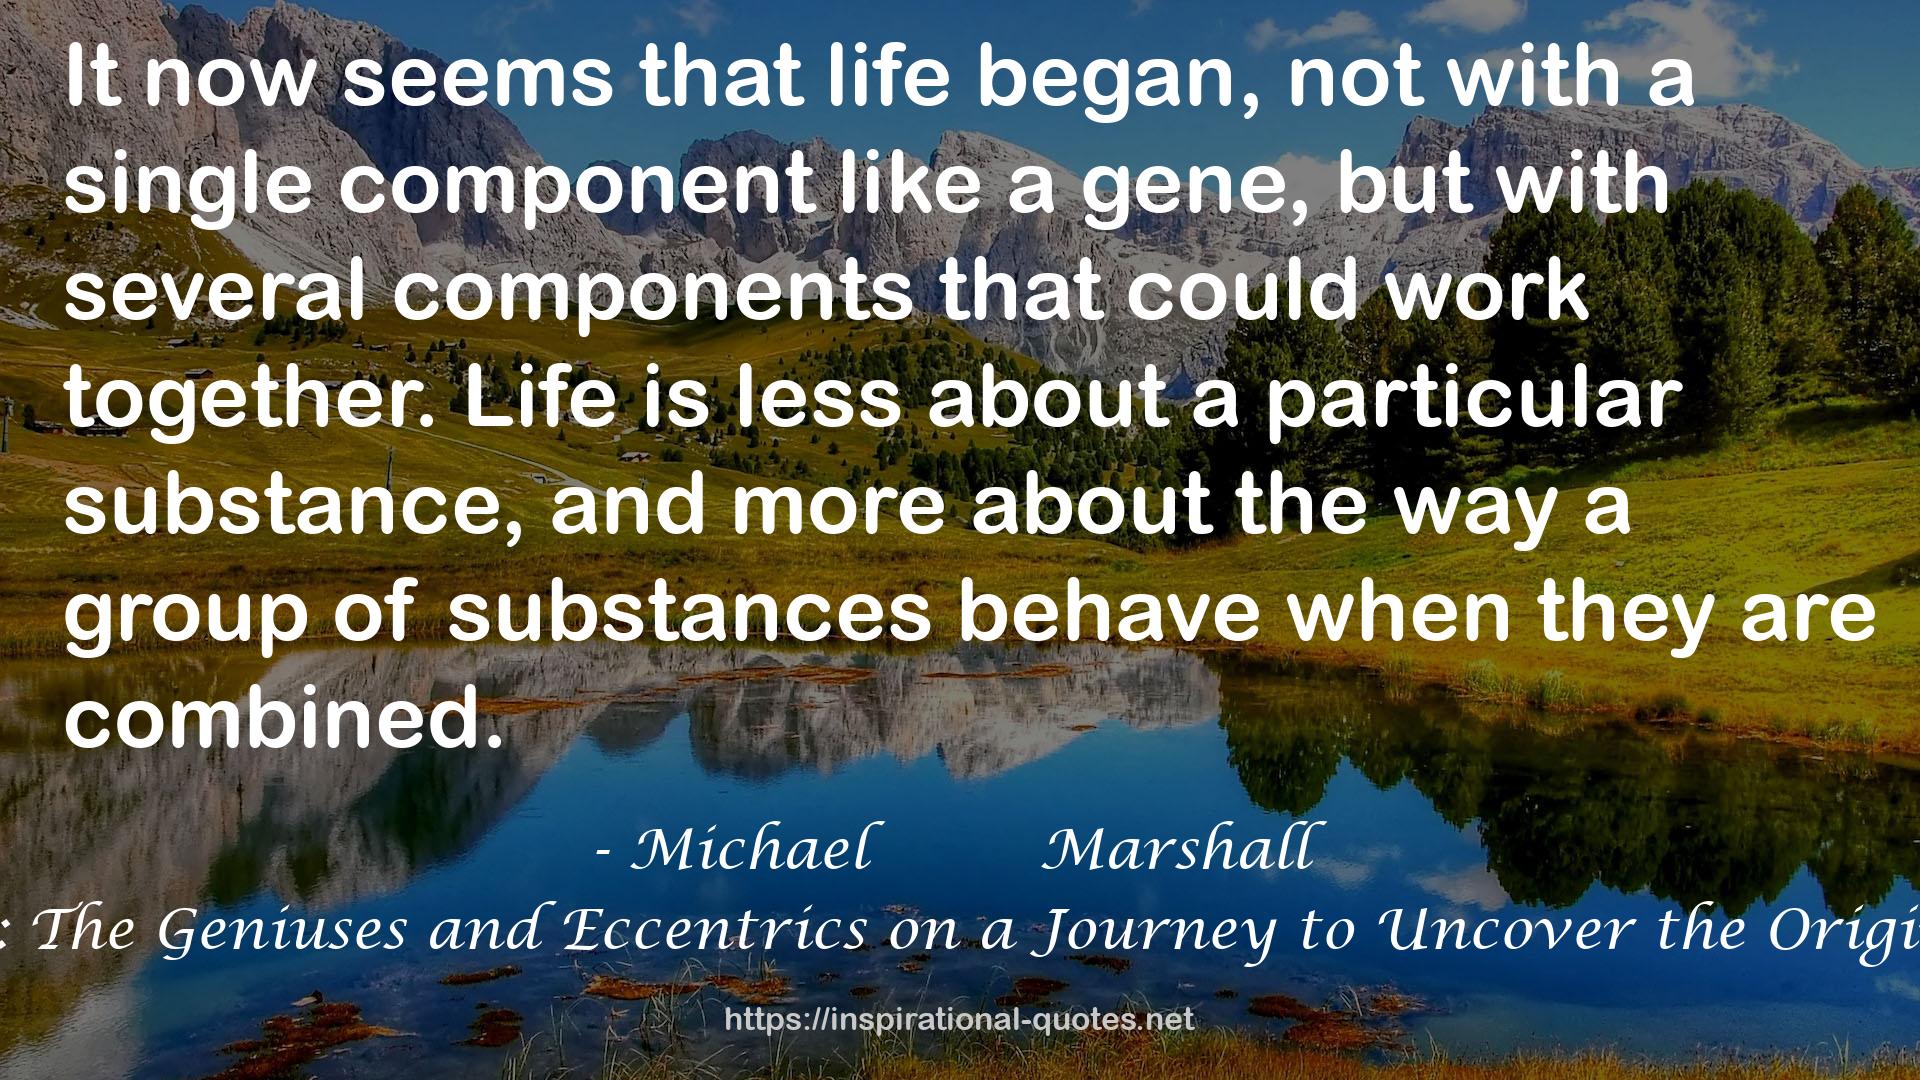 The Genesis Quest: The Geniuses and Eccentrics on a Journey to Uncover the Origin of Life on Earth QUOTES